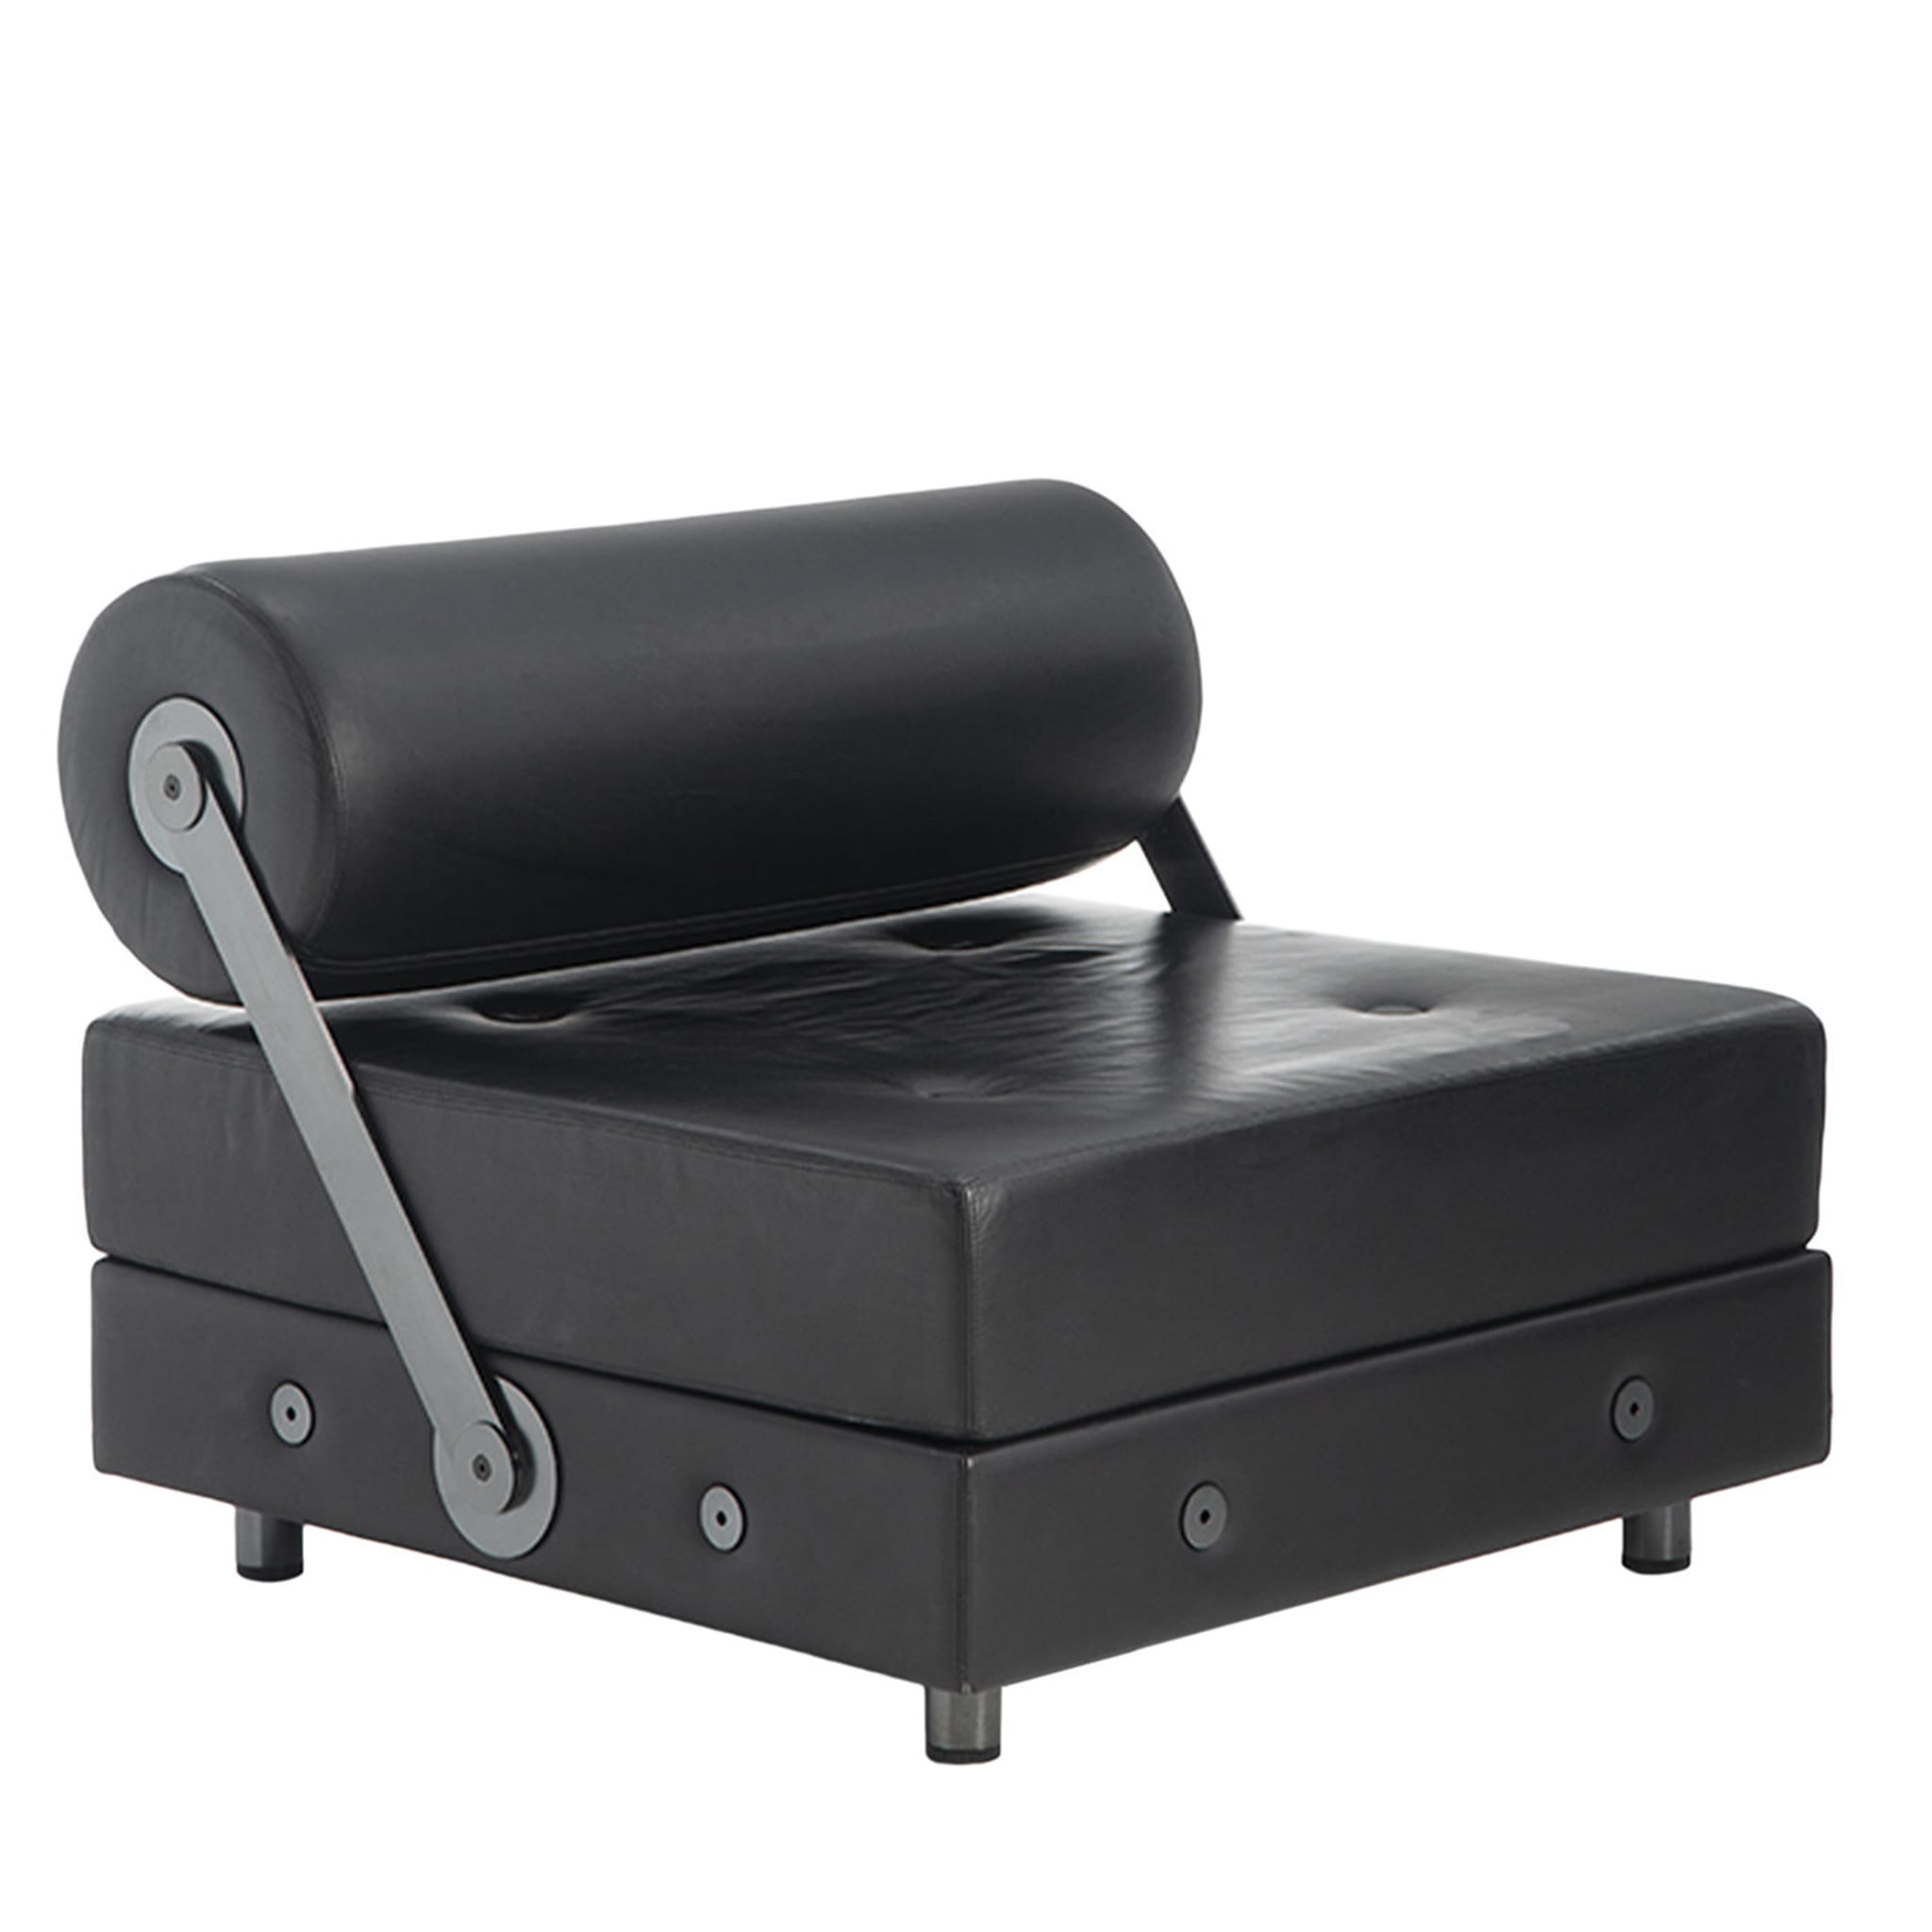 Todo Modo Black Lounge Chair by Jean-Michel Wilmotte - Main view